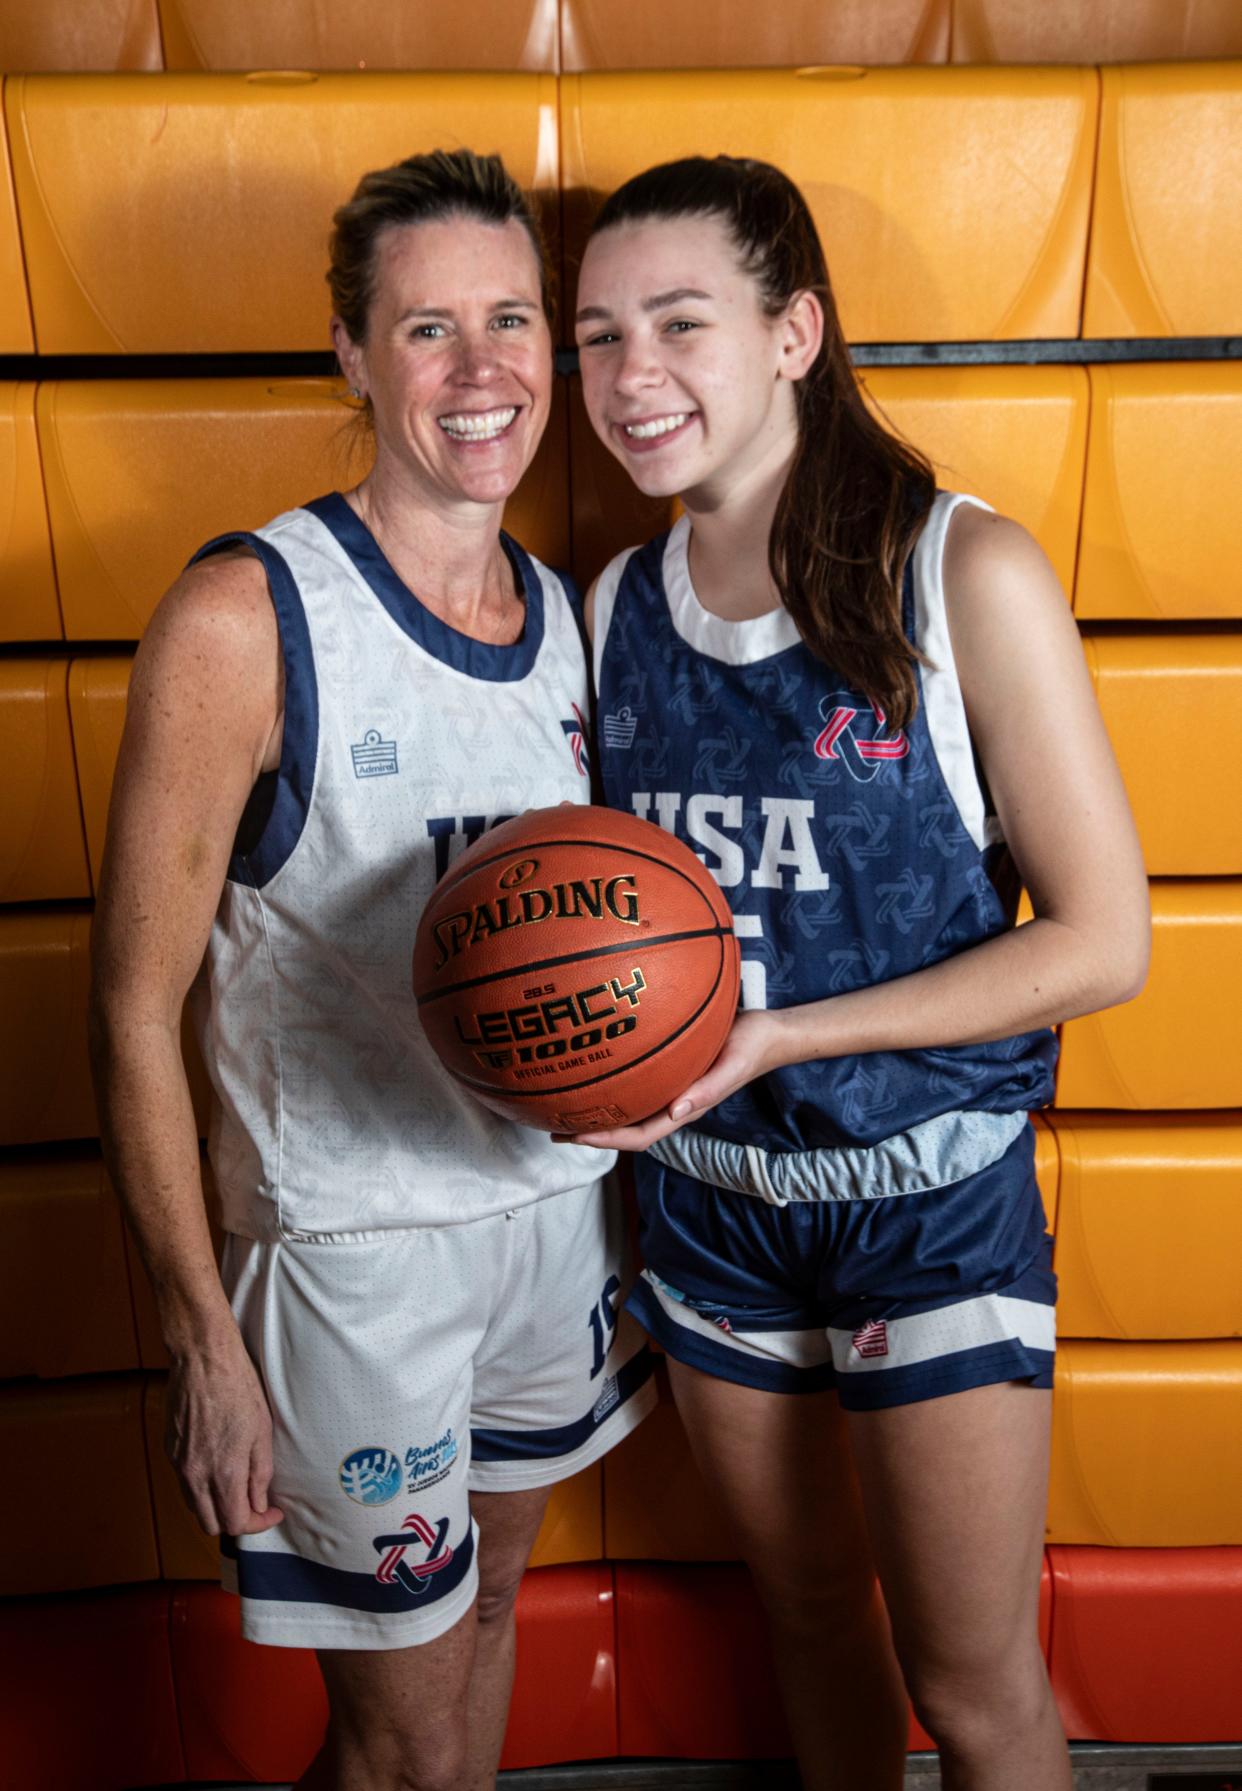 Caroline Dorfman of Mamaroneck and her daughter Addison, 15, both won medals in basketball at the Maccabi Pan-Am Games in Argentina over the holidays. Caroline played on the USA open team, and Addison played on the USA U18 team. When countries pulled out over security concerns, Addison's team was forced to play against adult teams, including playing against her mother. They were photographed at Mamaroneck High School Jan. 15, 2024.